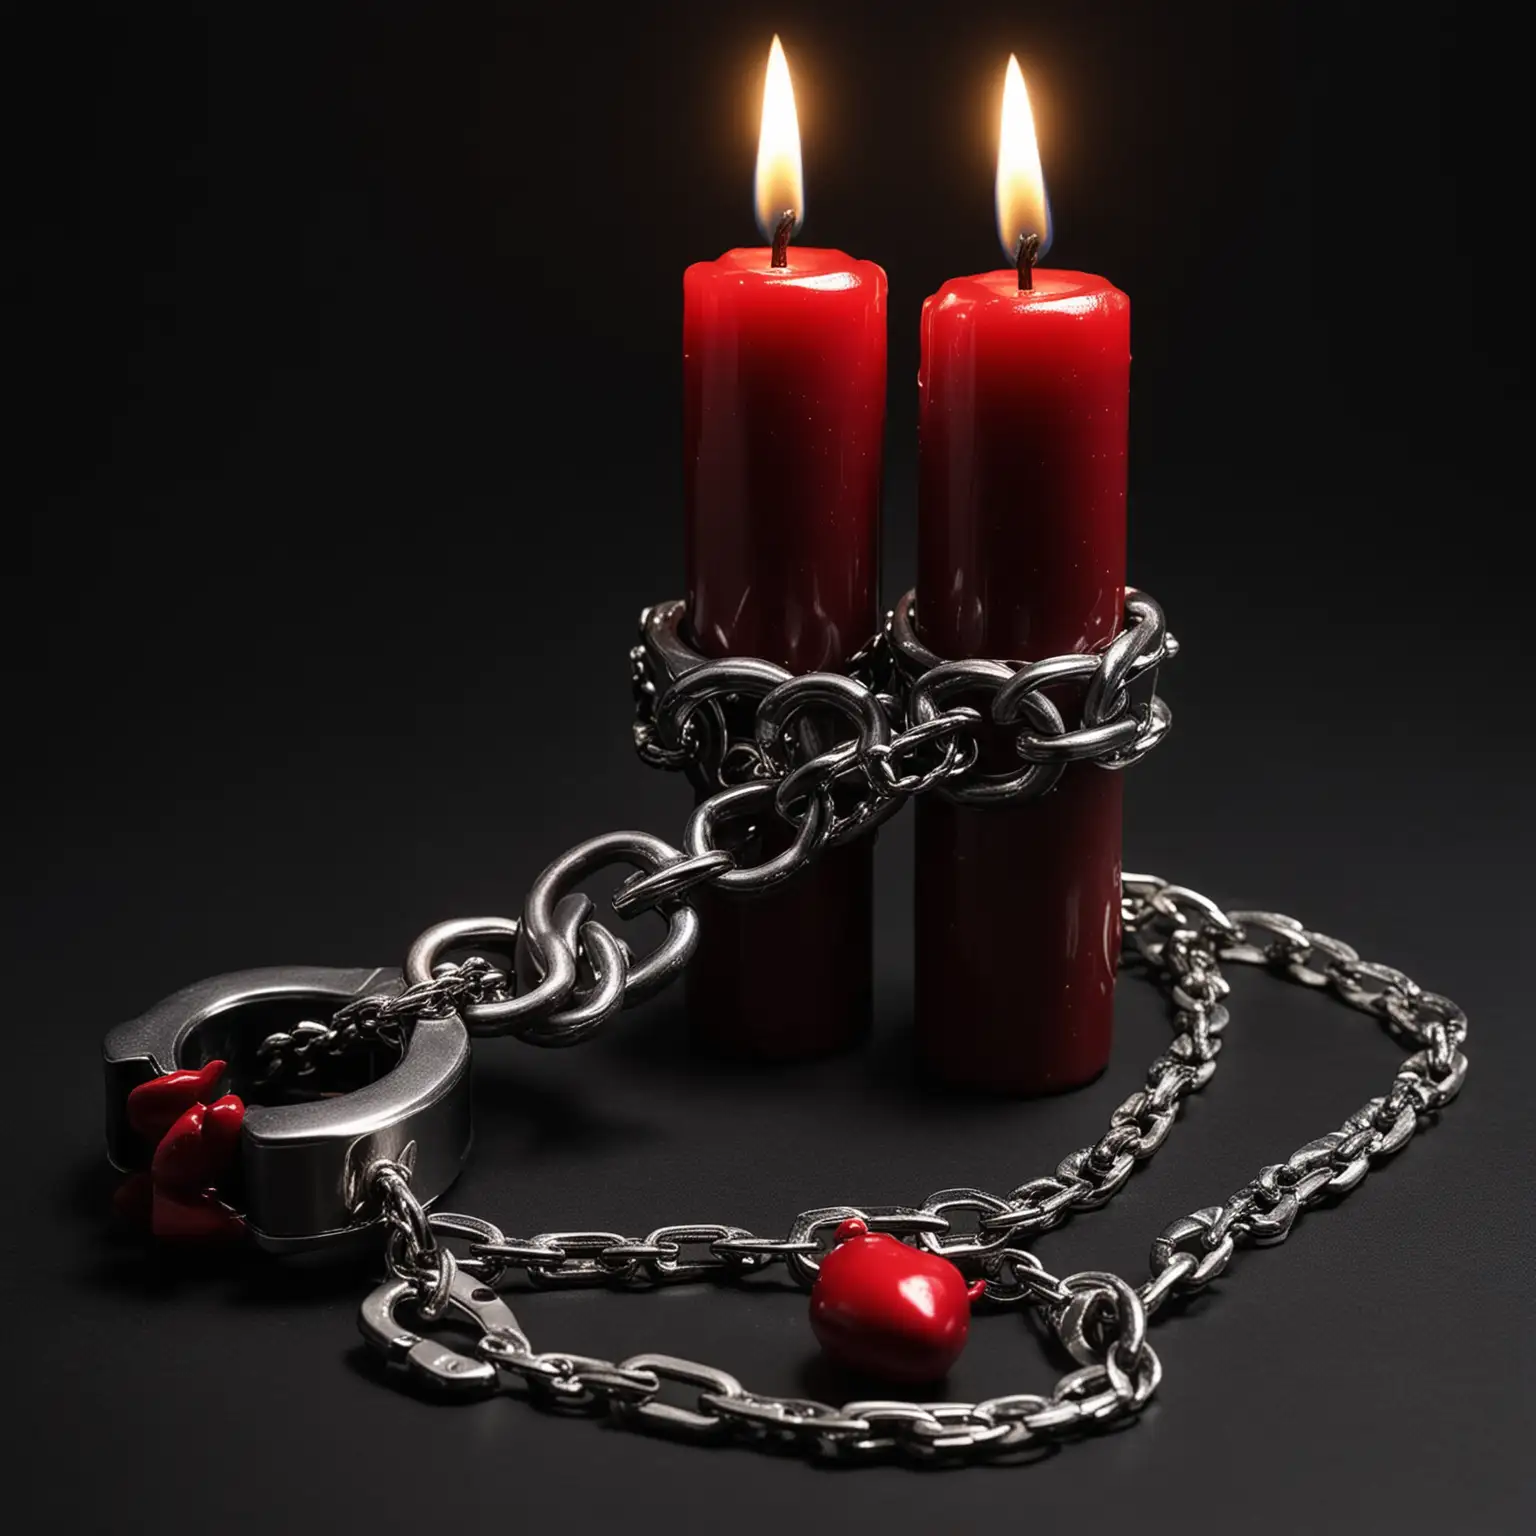 Erotic BDSM Still Life with Red Lipstick and Candle